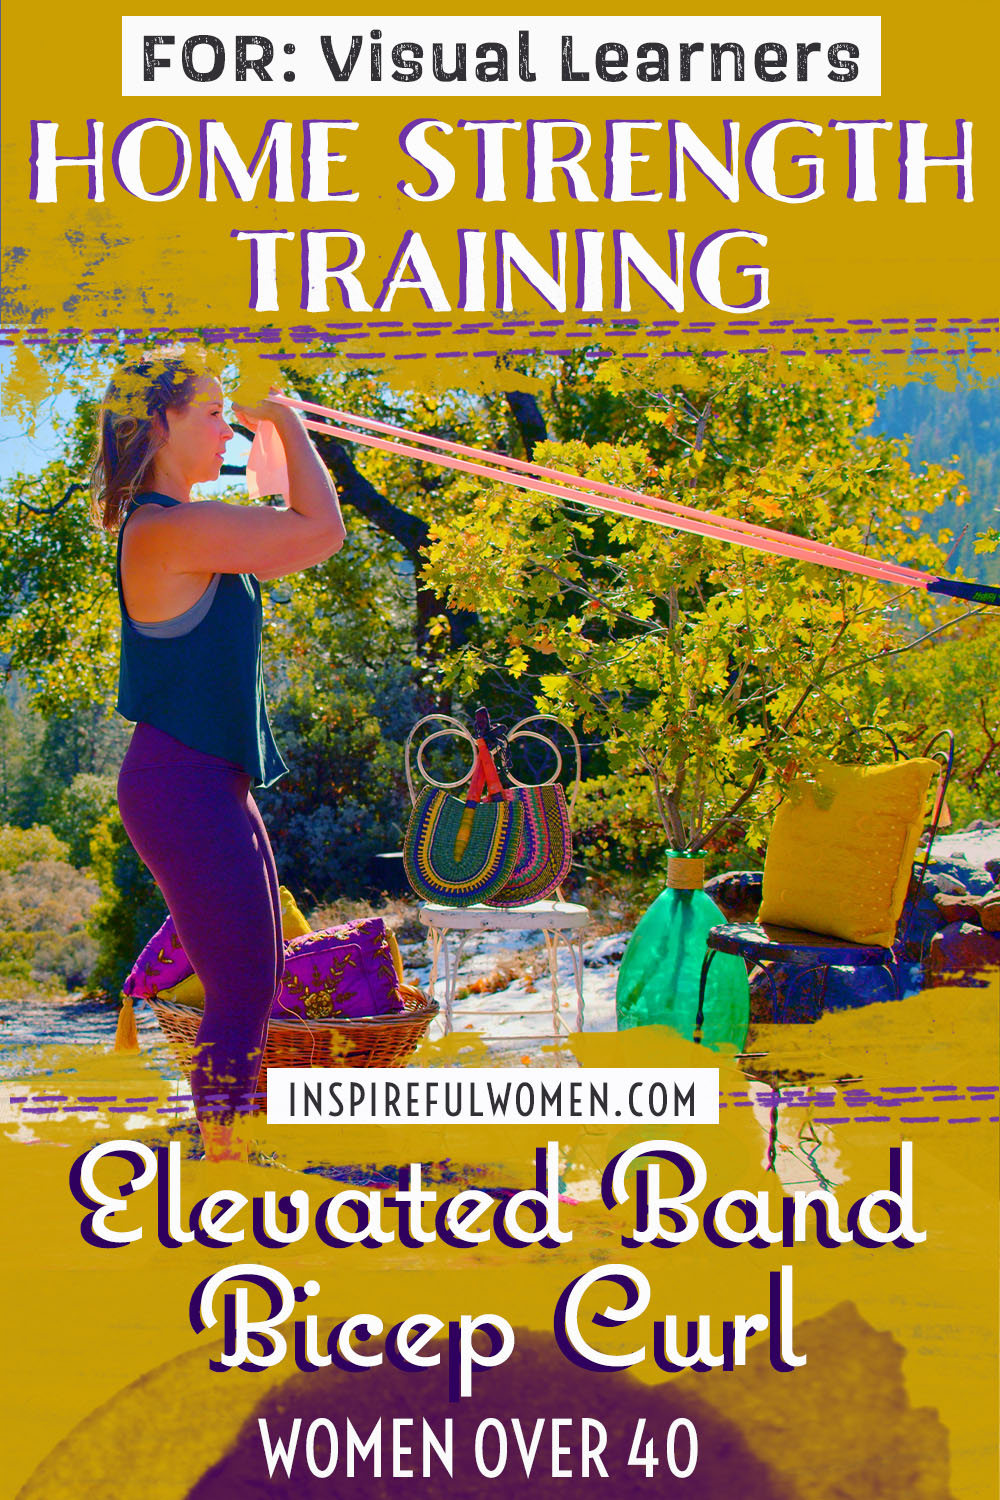 shoulder-flex-band-high-bicep-curl-alternative-arm-toning-exercise-at-home-women-over-40